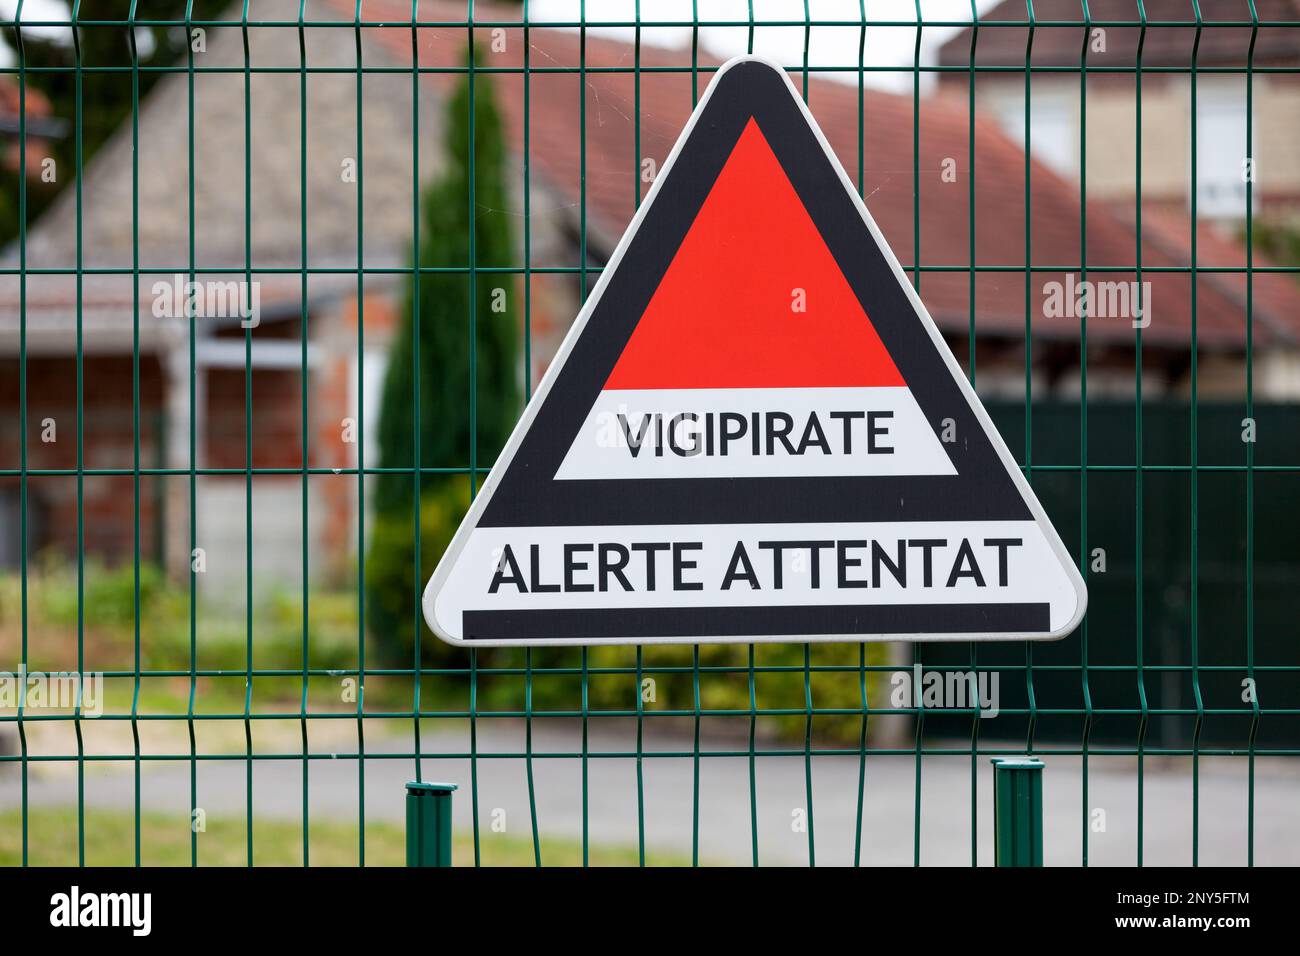 Triangular sign attached to a school fence for the Vigipirate plan, the France's national security alert system against terrorist threats. Stock Photo